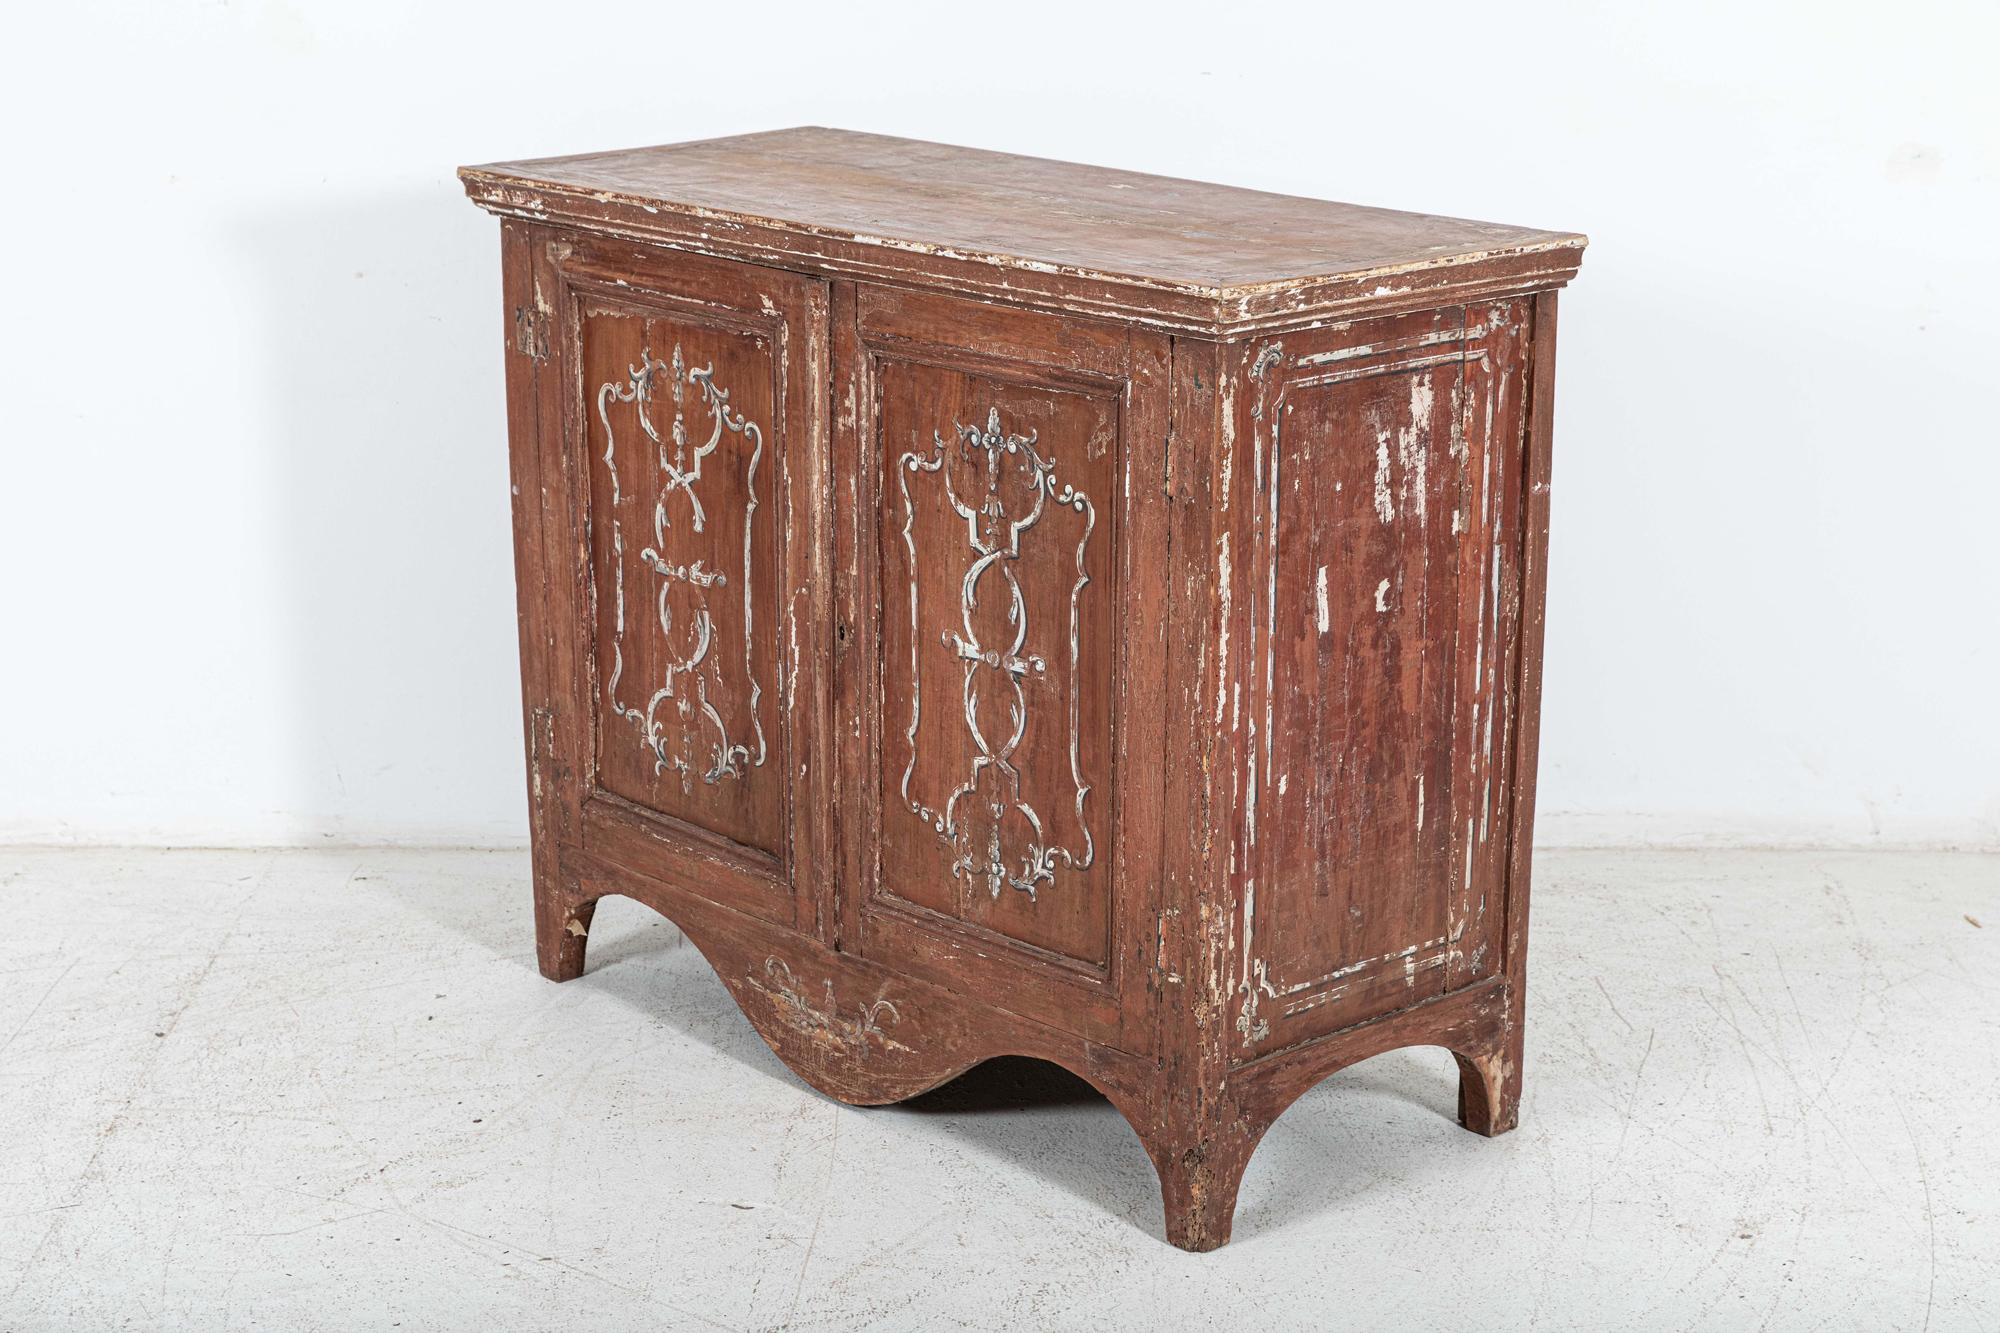 Circa 1850

19thC Italian Hand Painted Buffet, excellent decorative worn patination and form

sku 902

W119 x D54 x H97 cm